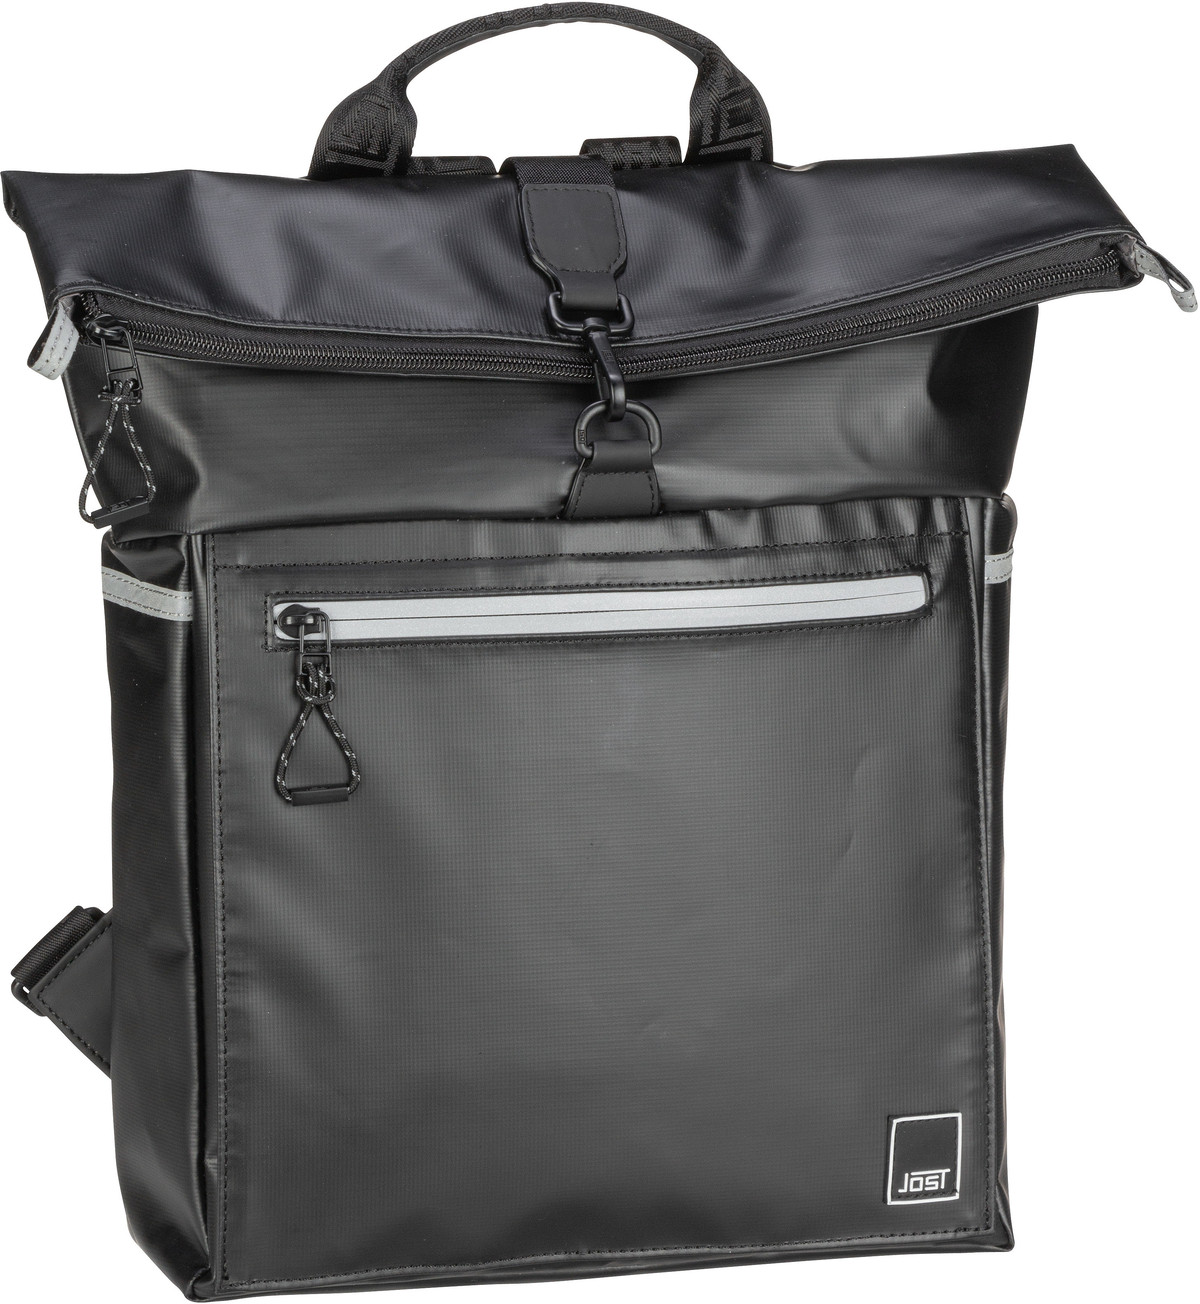 Jost Tolja Cyclist Backpack Courier S - Black